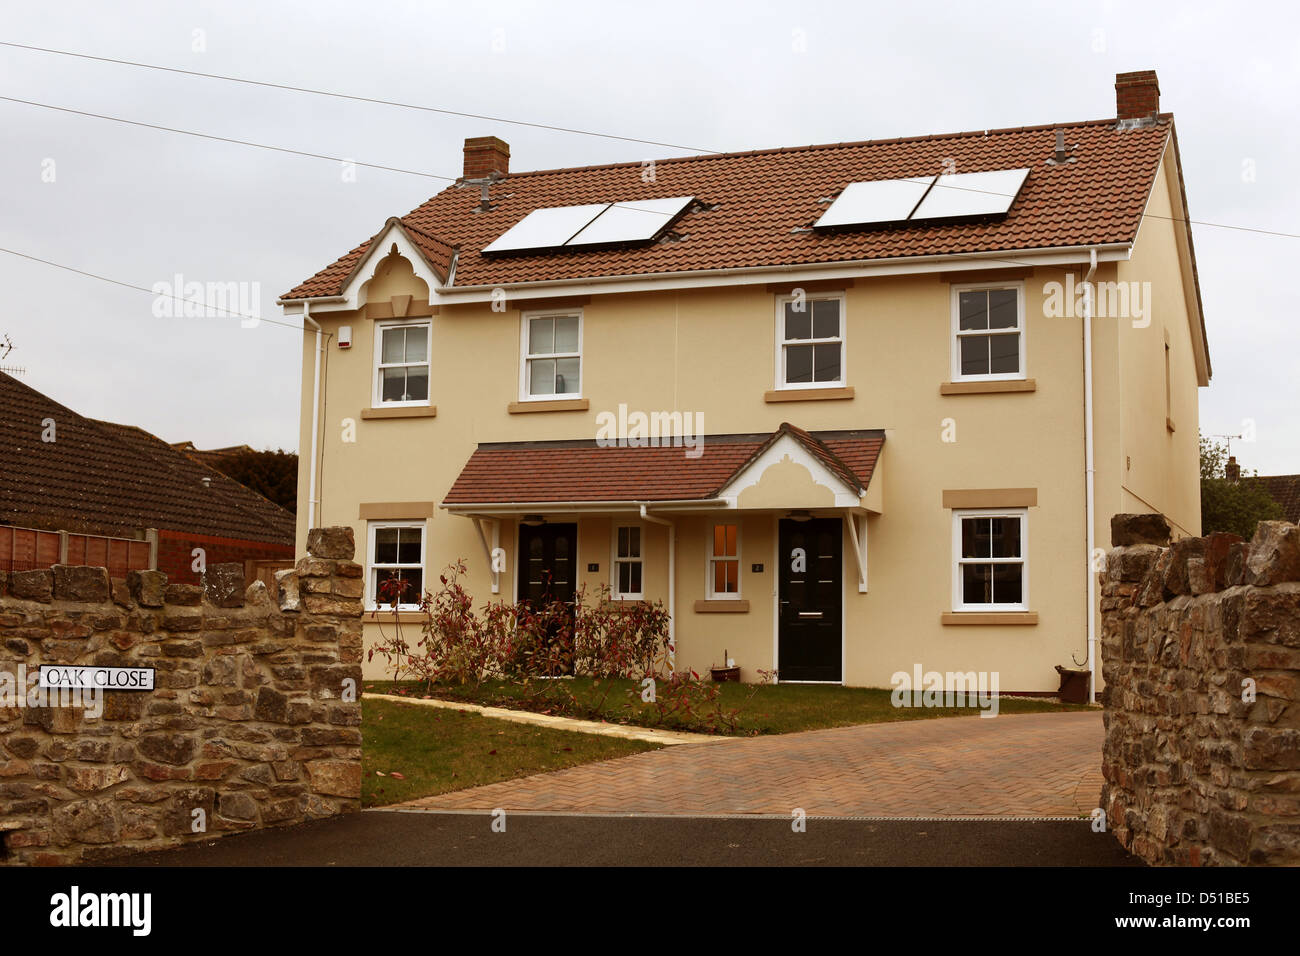 Newly build modern English homes with solar panel on the roof, these homes were built in 2012. Stock Photo